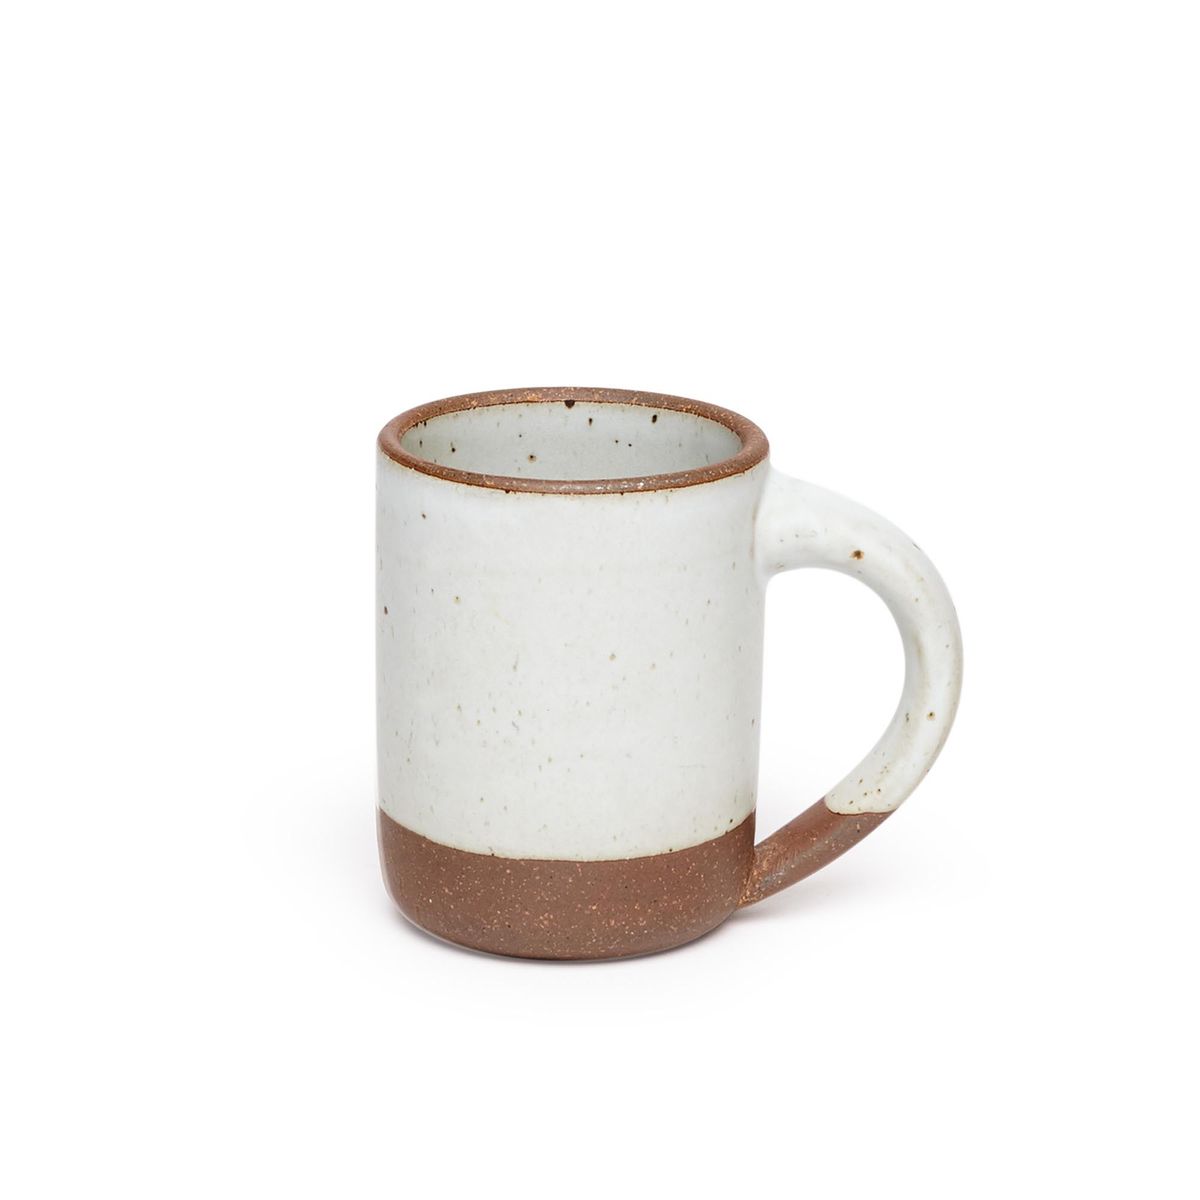 A medium sized ceramic mug with handle in a cool white color featuring iron speckles and unglazed rim and bottom base.